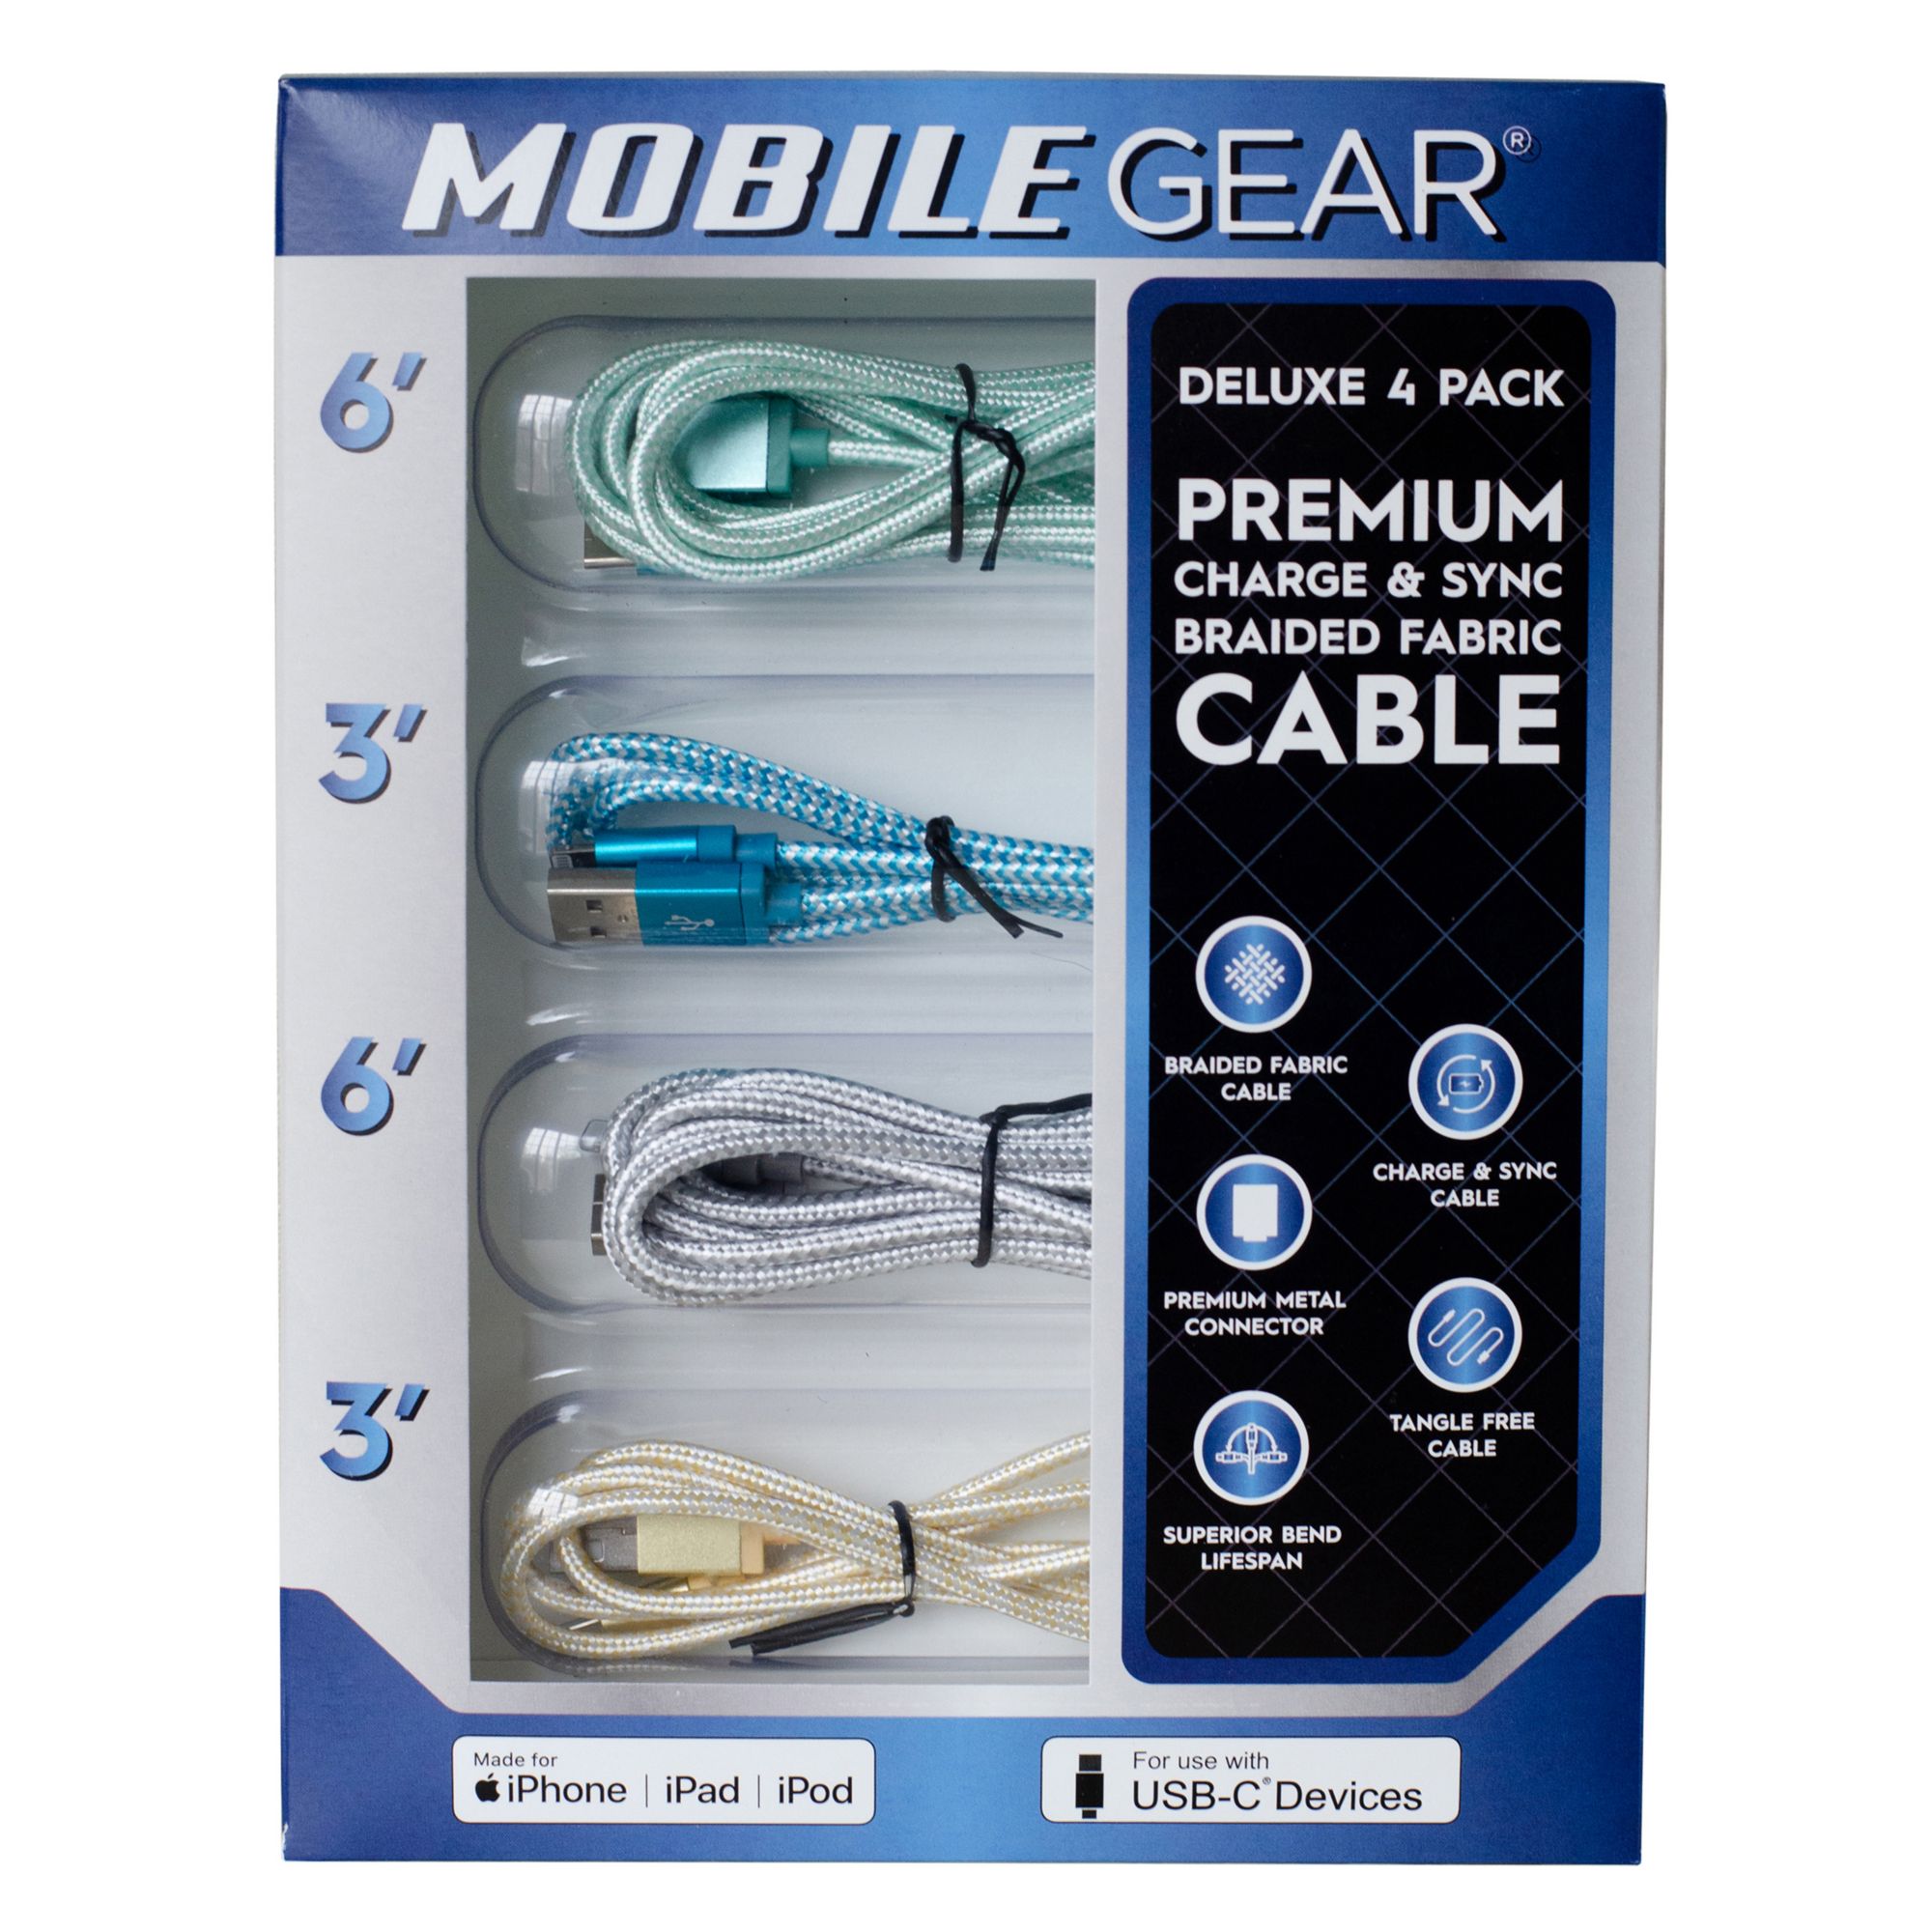 Mobile Gear Deluxe Premium Lightning, USB-C Charge and Sync Cables, 4 pk.